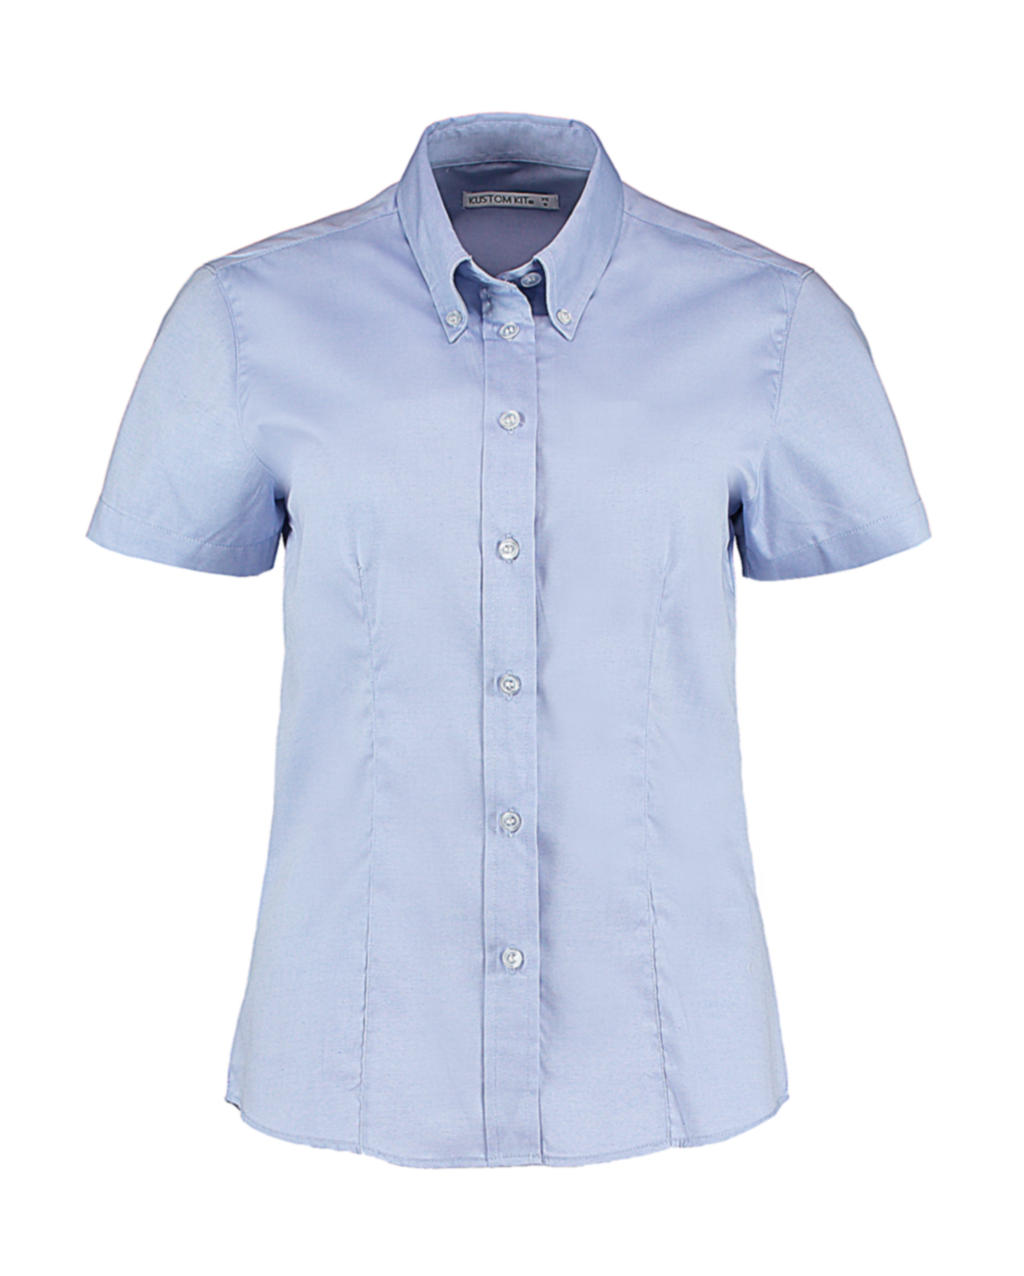  Womens Tailored Fit Premium Oxford Shirt SSL in Farbe Light Blue